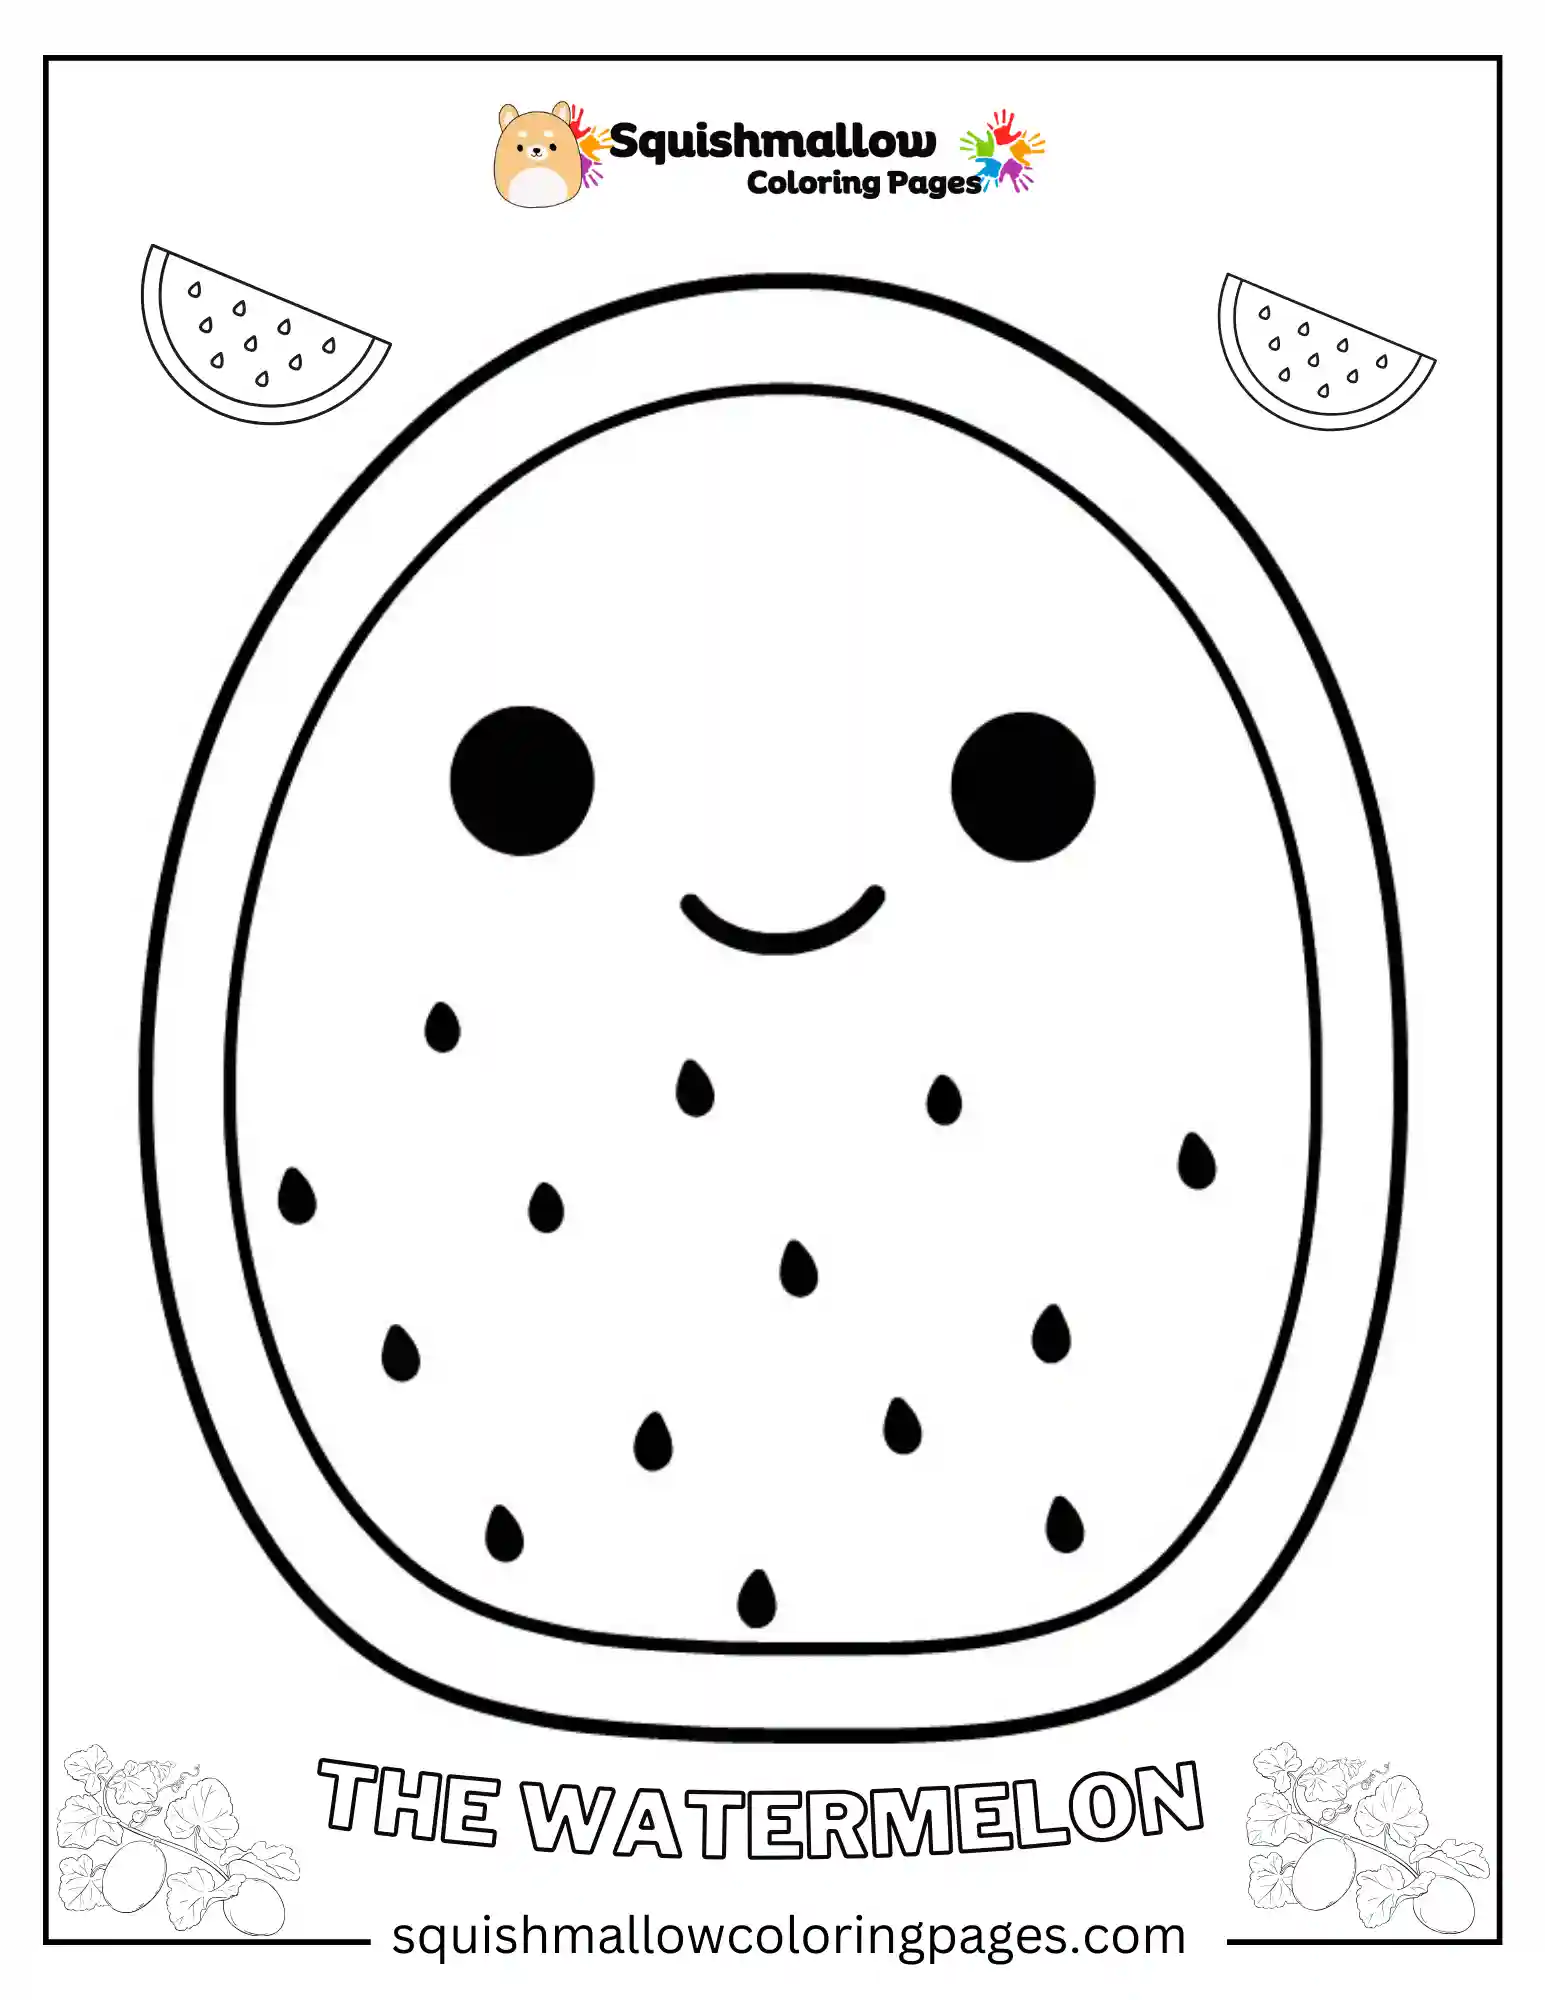 The Watermelon Squishmallow Coloring Pages